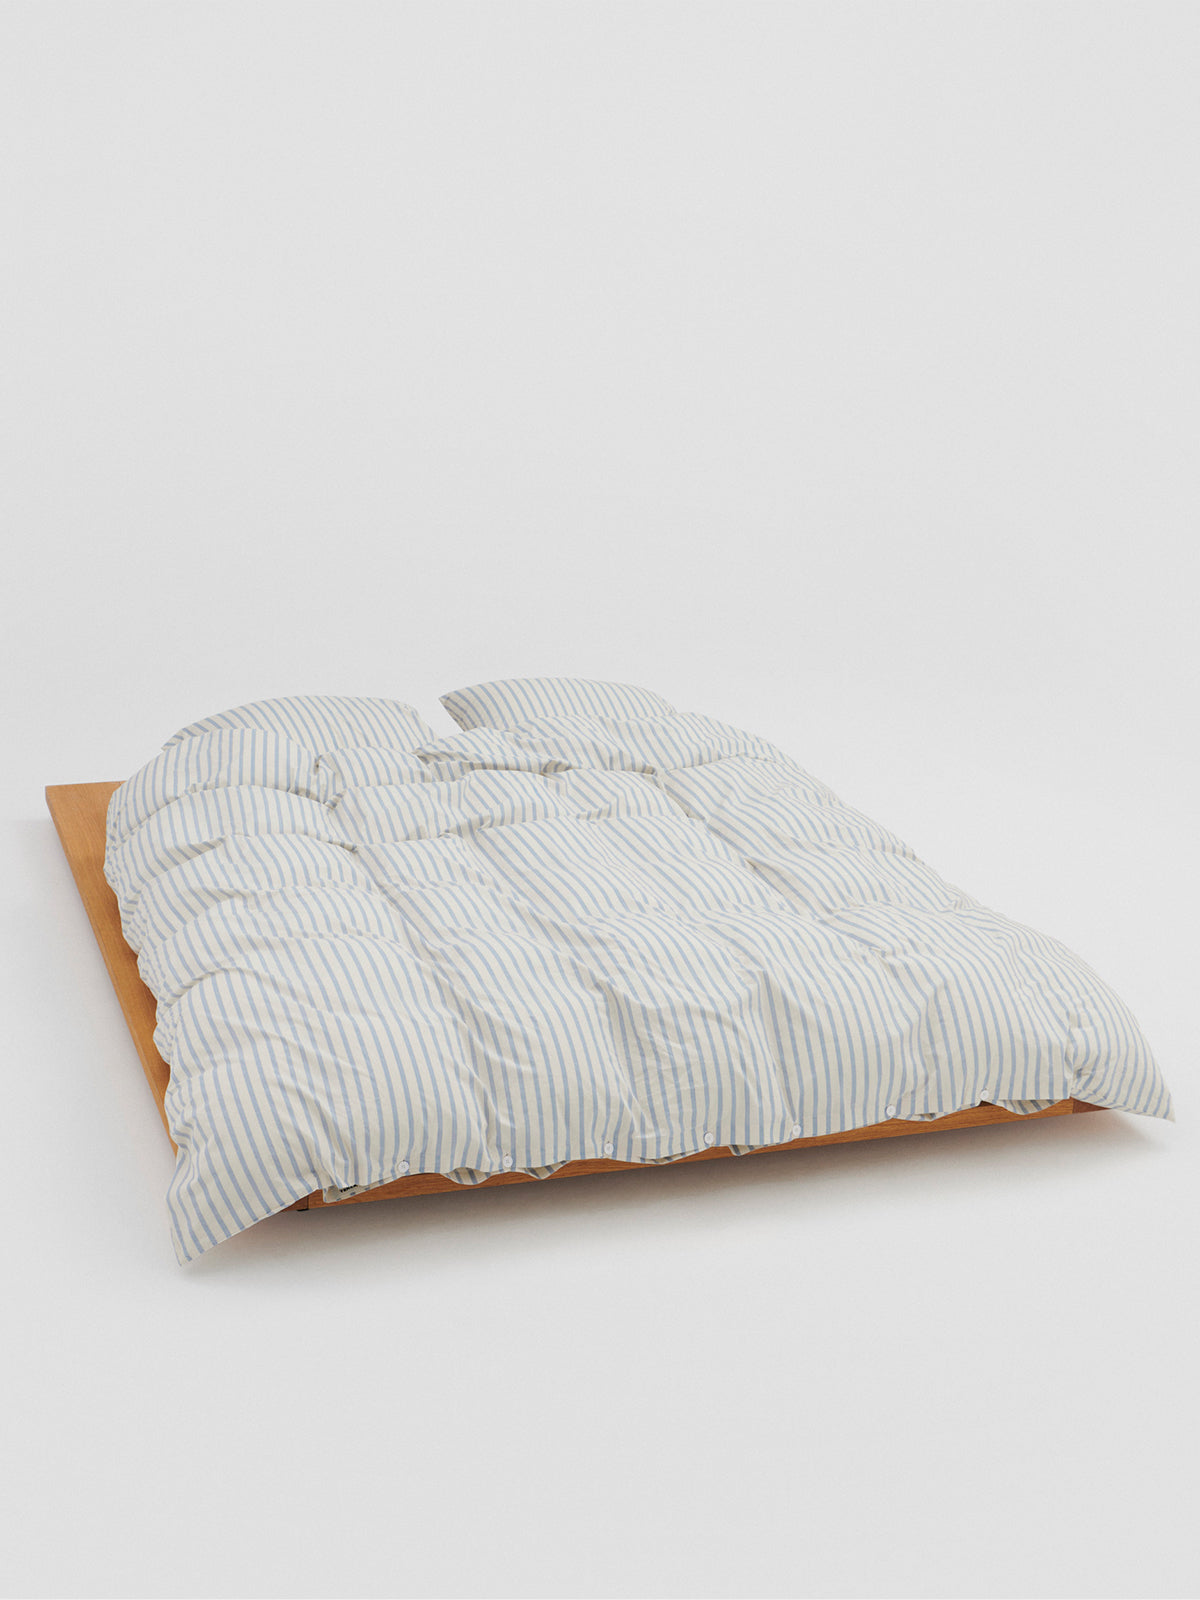 Percale Duvet Cover in Needle Stripes